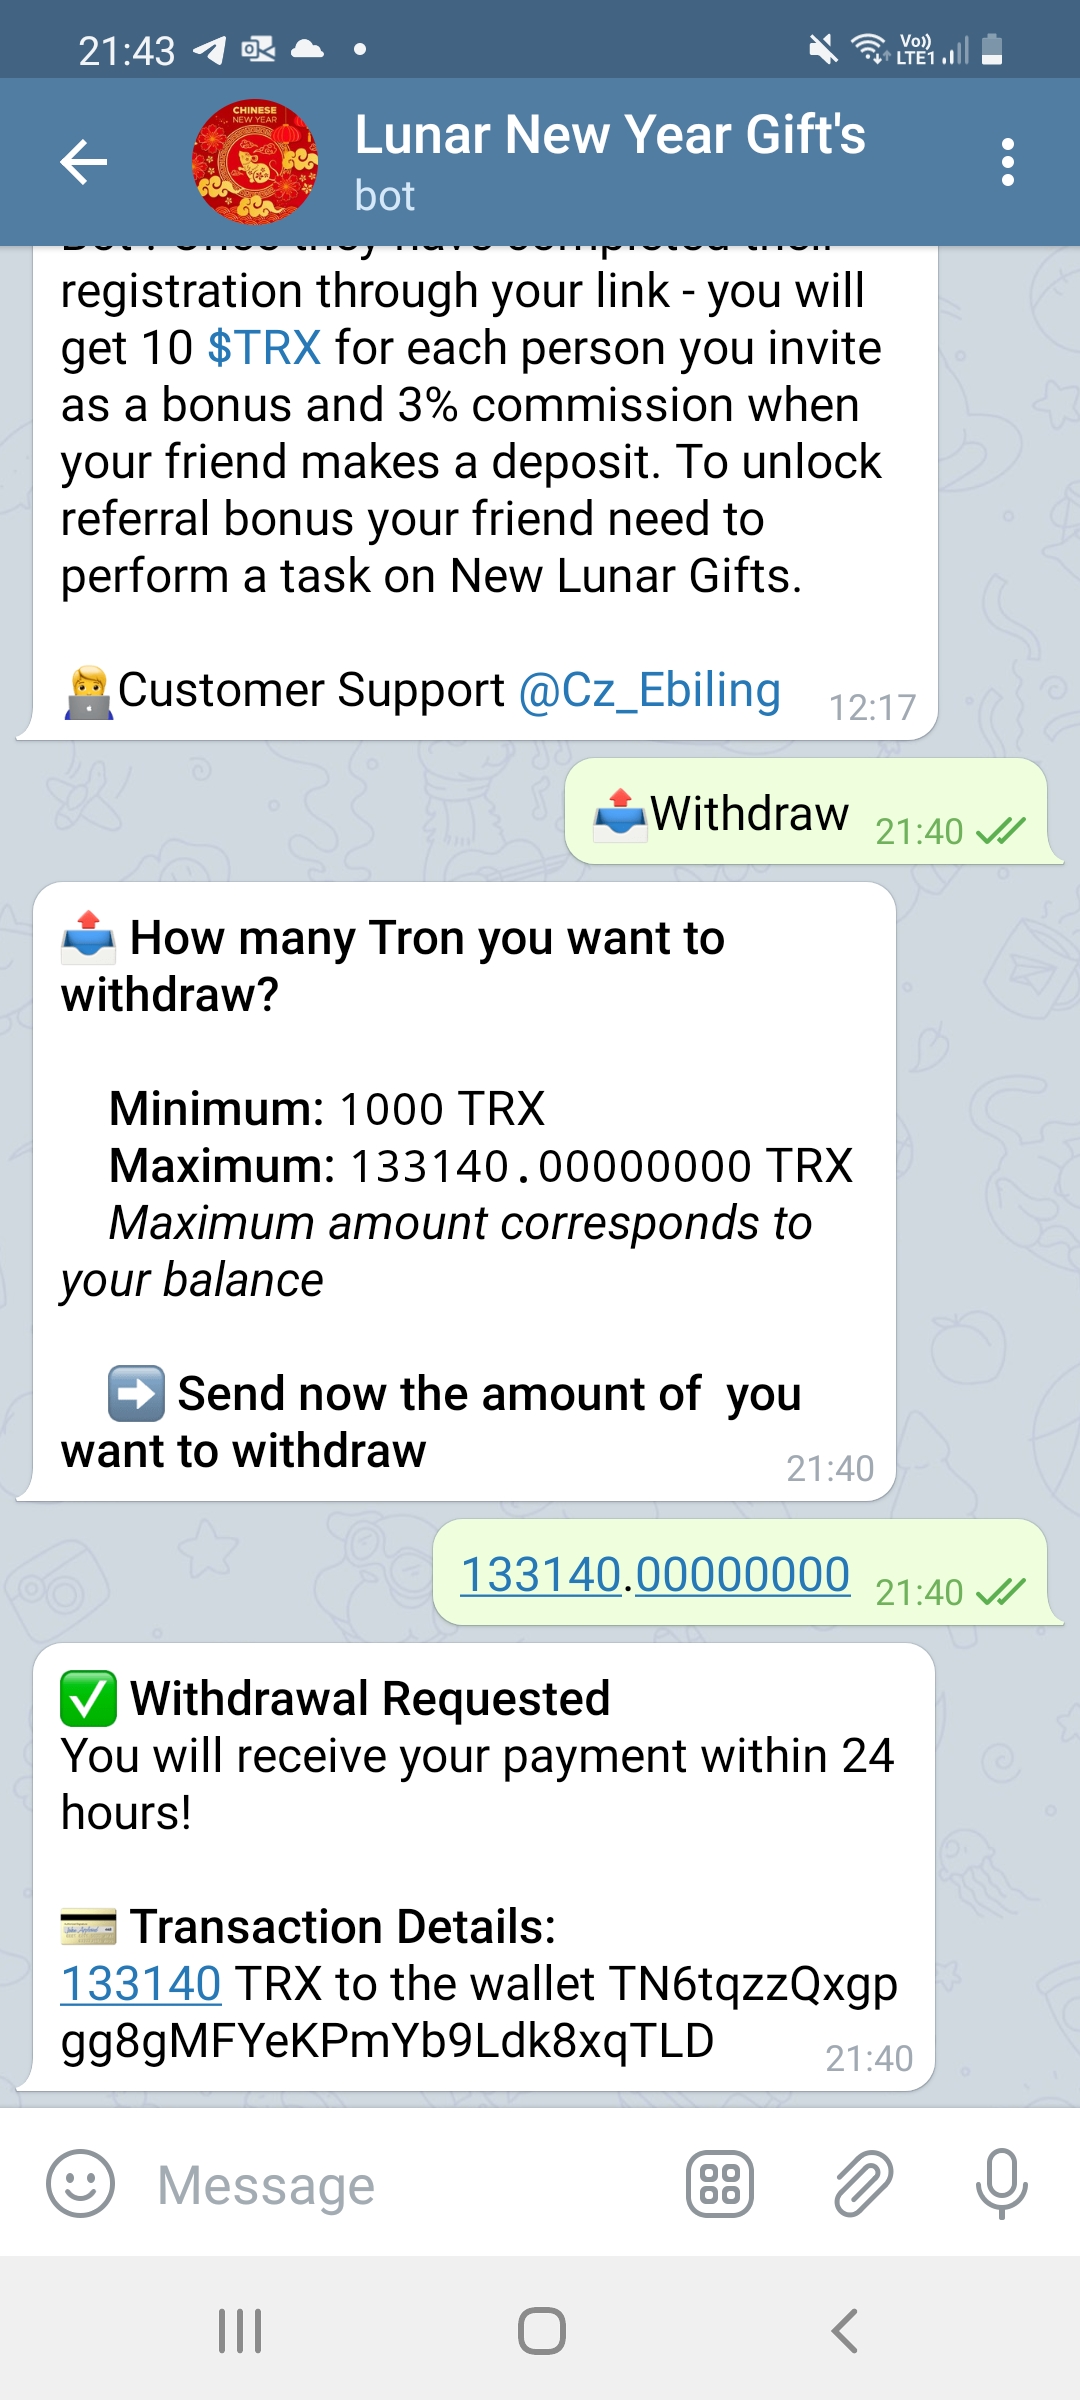 Telegram complaint Bot taking money for withdrawal and not paying